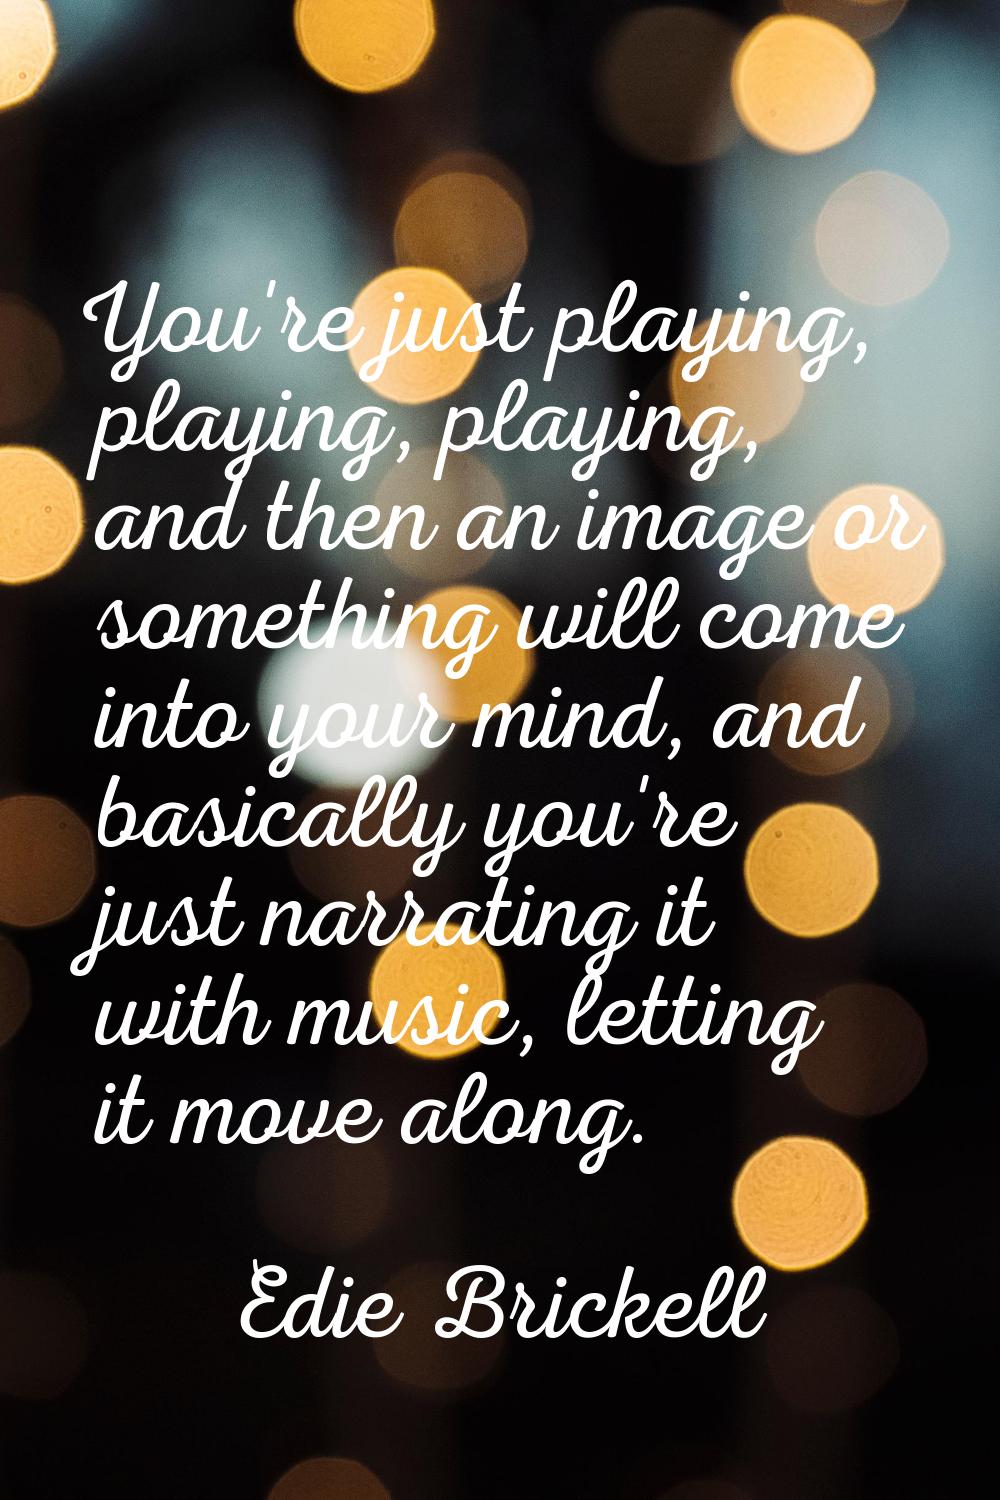 You're just playing, playing, playing, and then an image or something will come into your mind, and